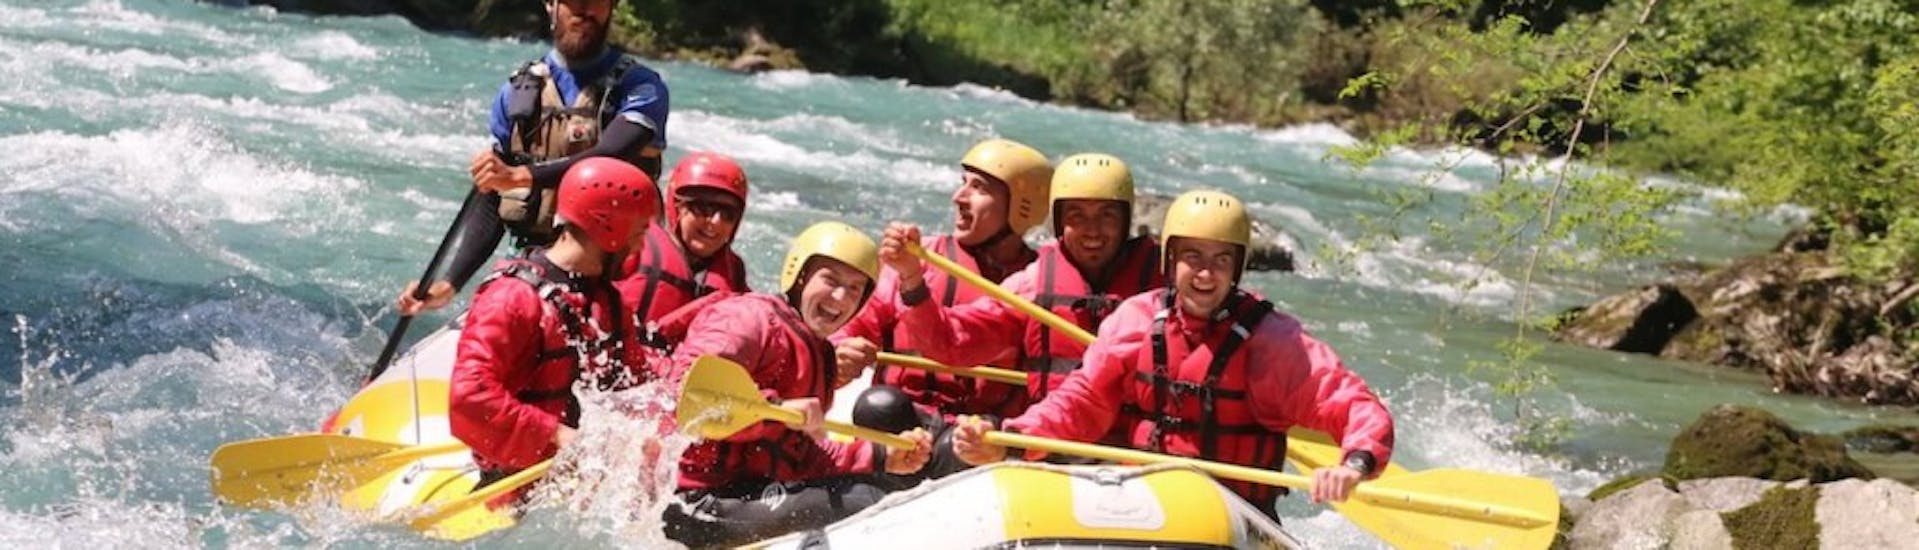 A sunny day in summer is always the perfect setting for the Rafting on the Stura River - Integral Tour.